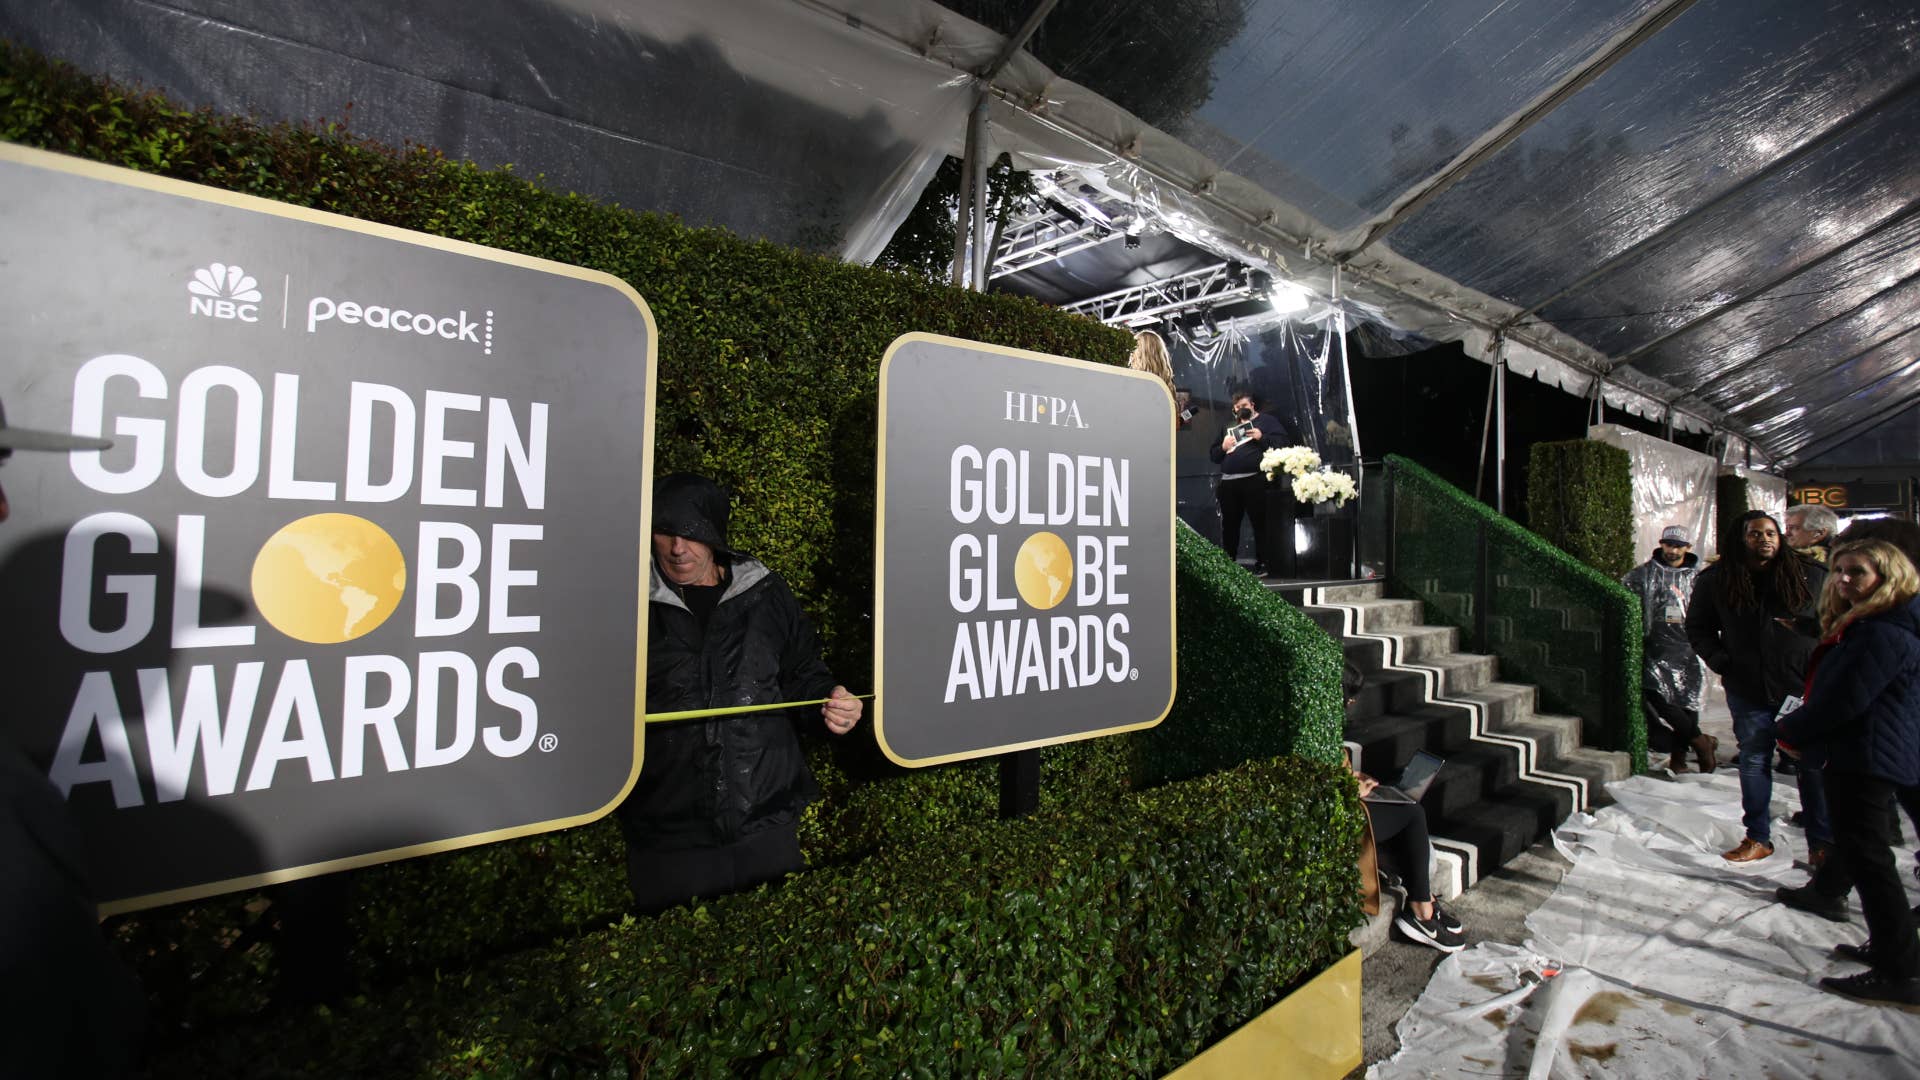 Golden Globes preparations are pictured